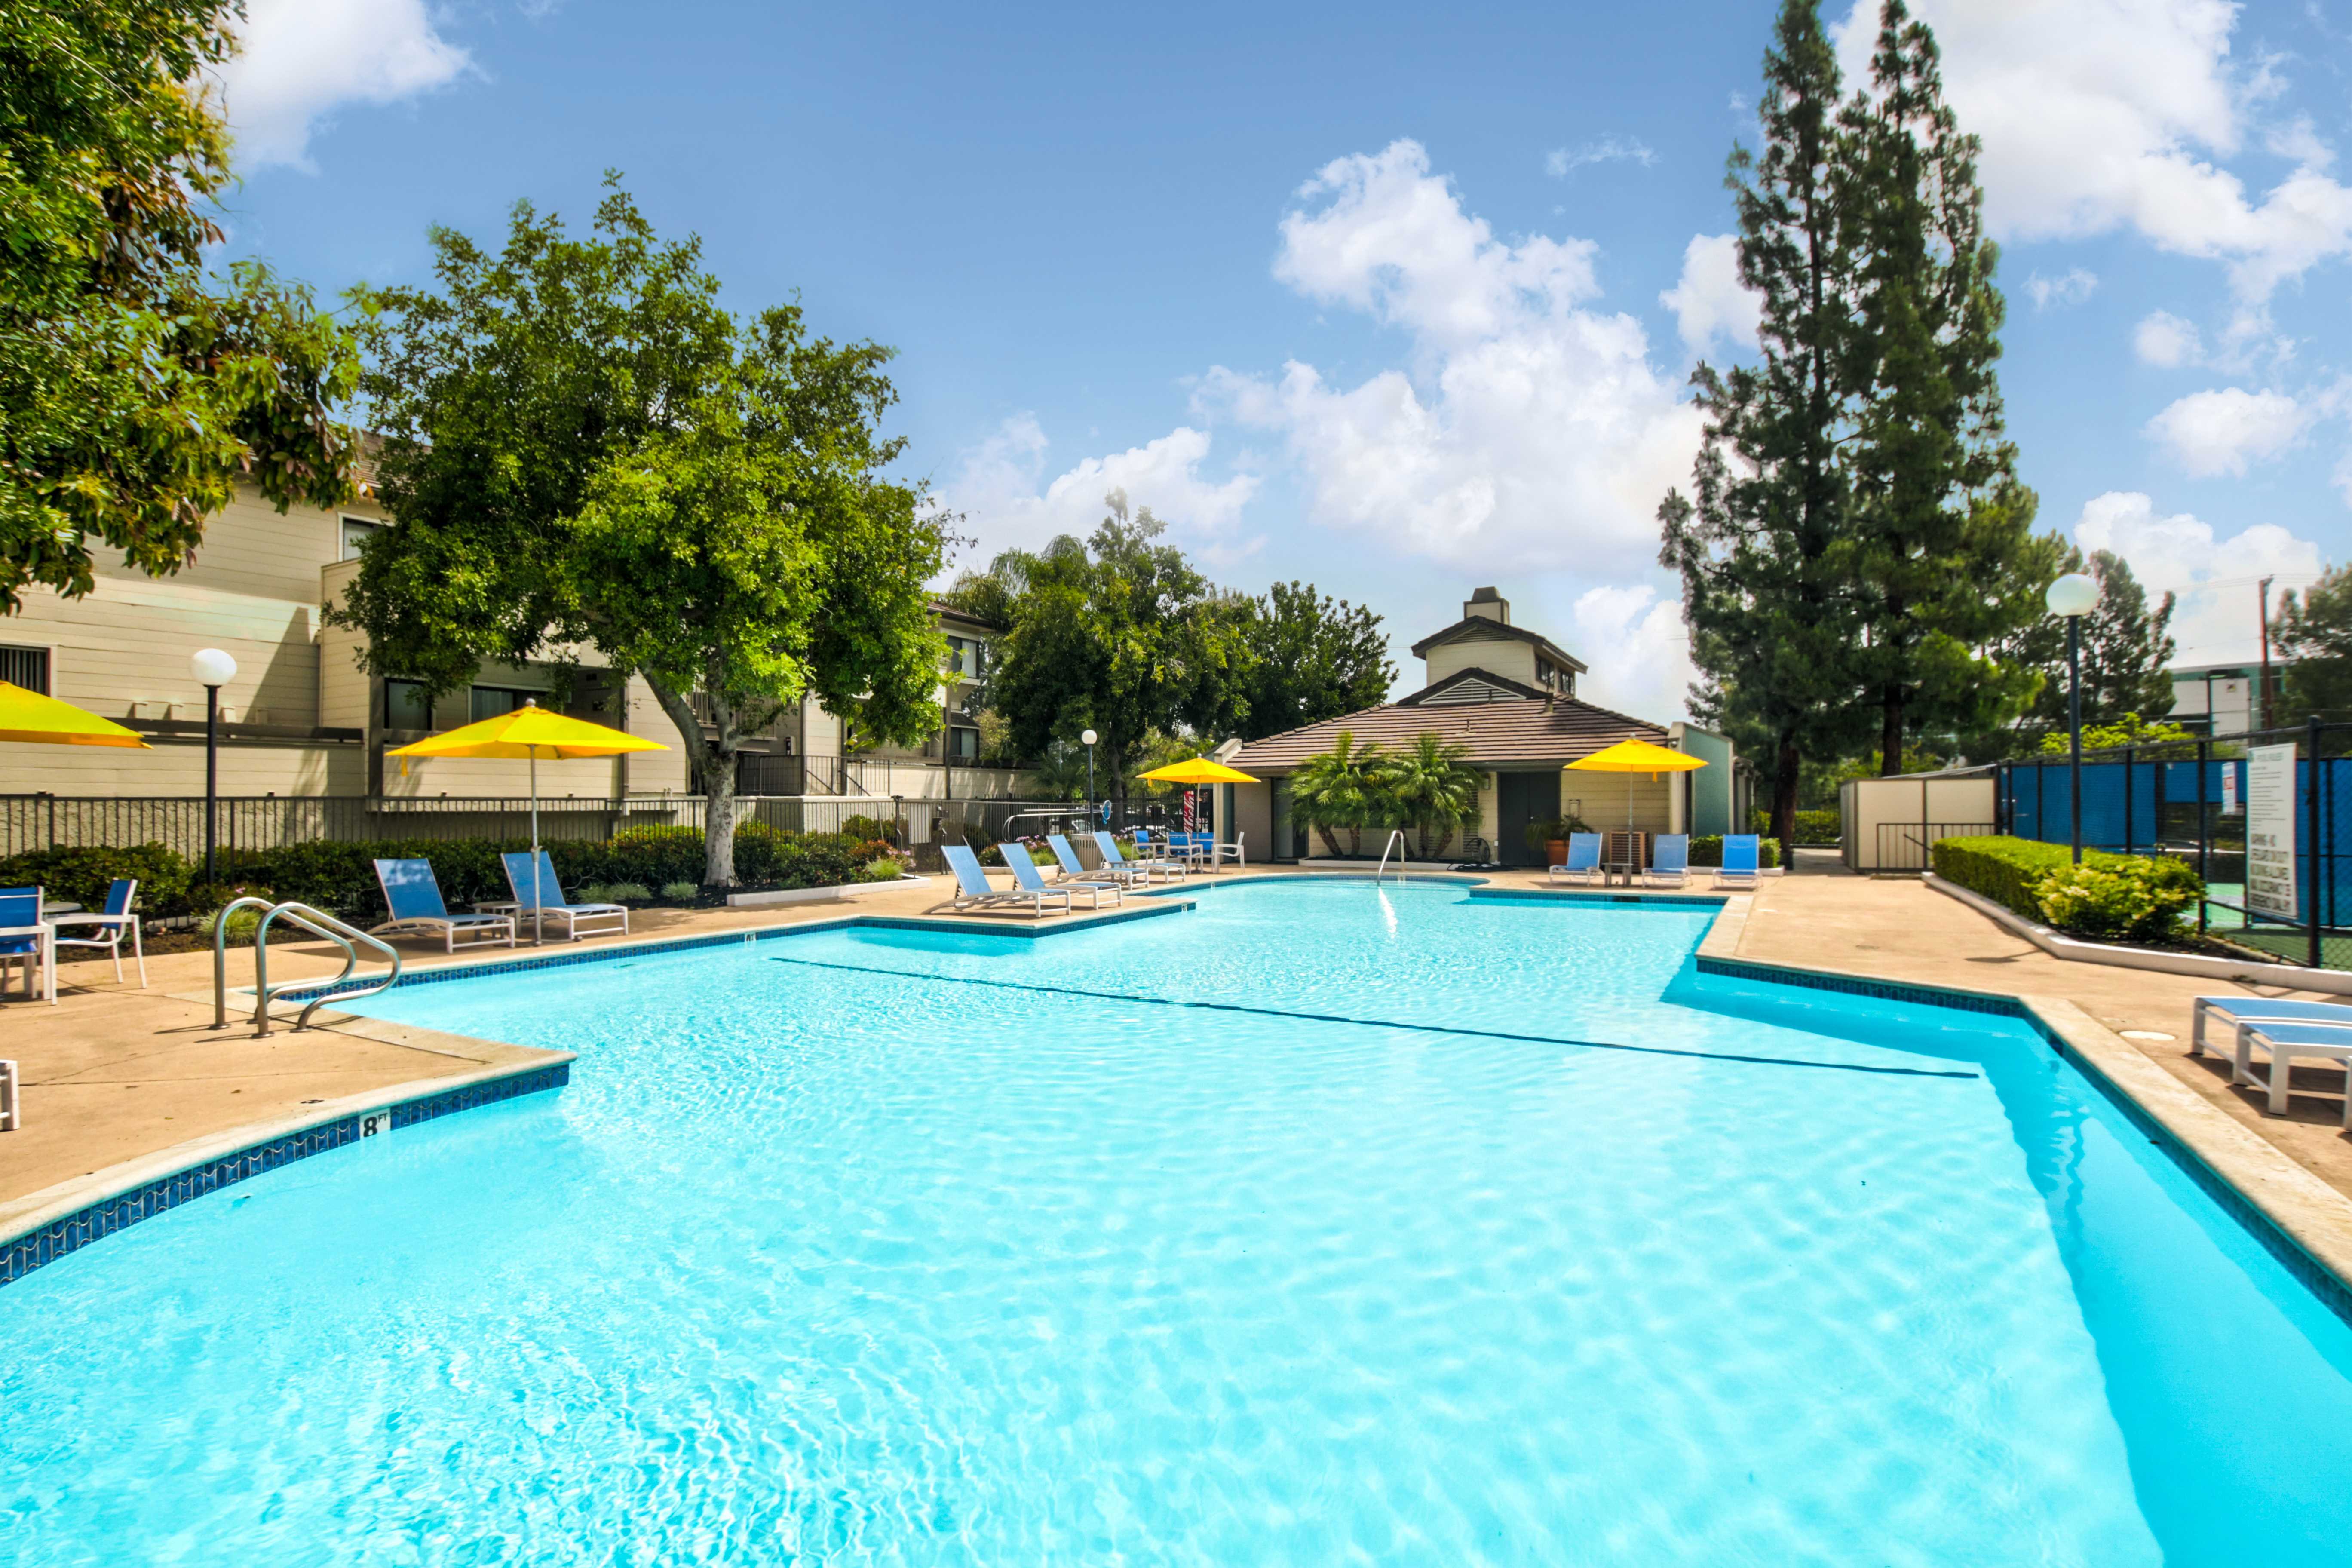 Different angle of pool that is surrounded by multiple lounging chairs, small circular tables, and yellow umbrellas. Across from it is a small hut. Plants and trees surround the perimeter of the area.